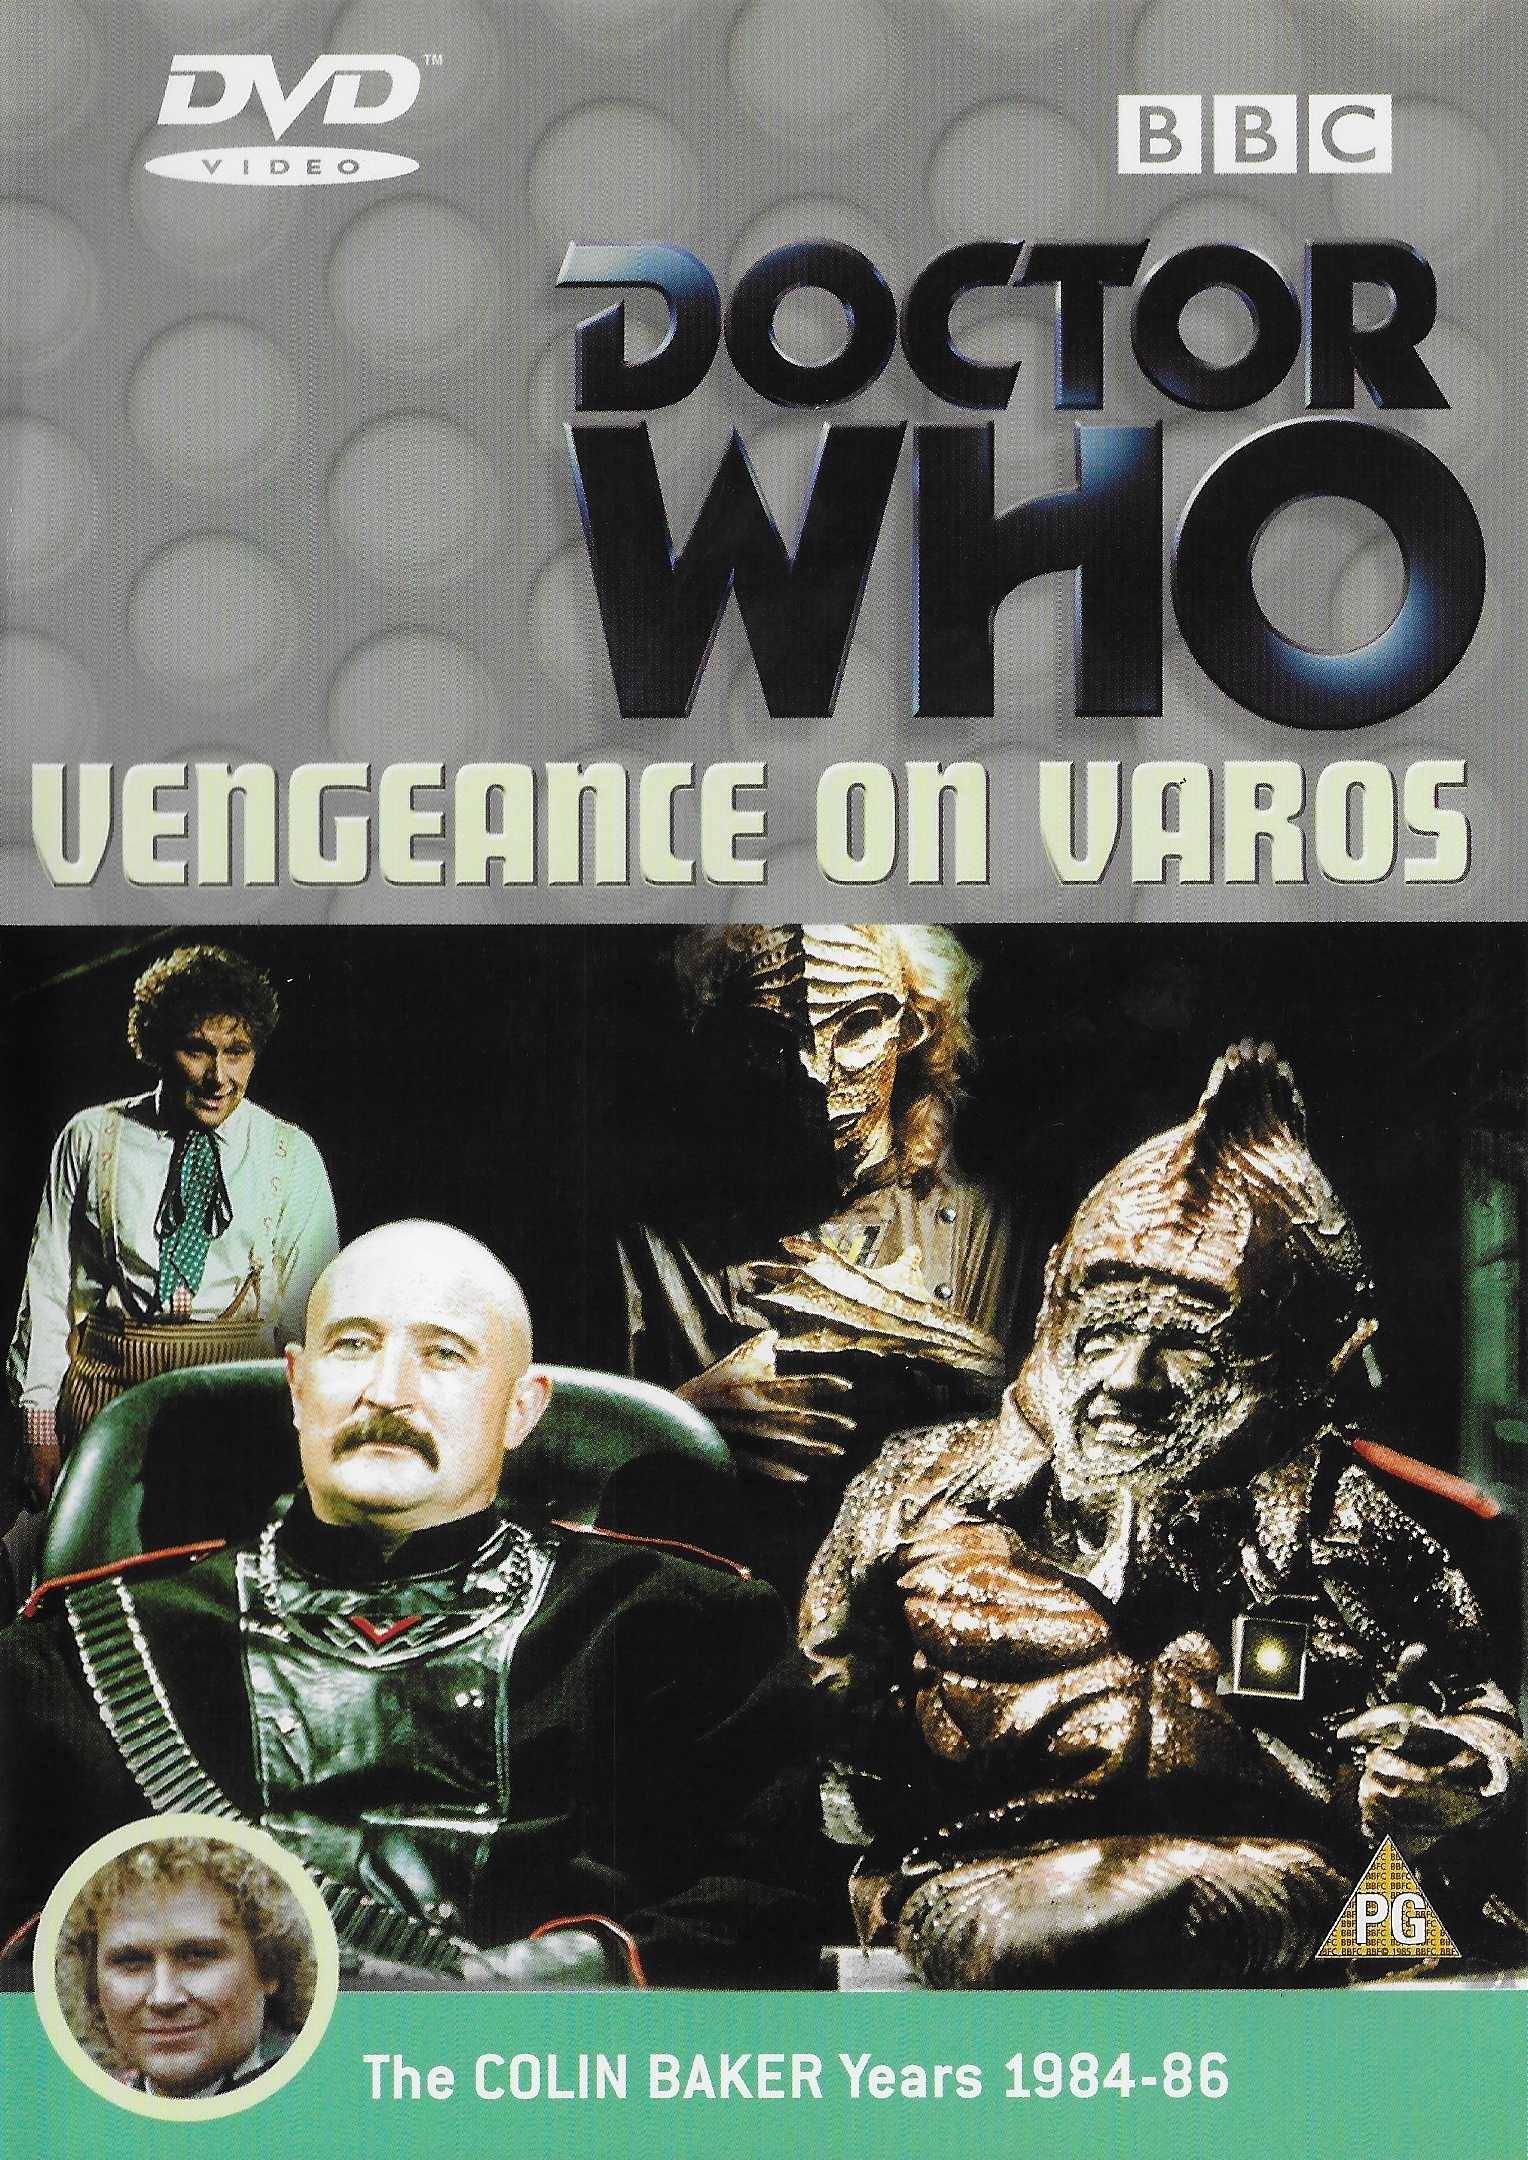 Picture of BBCDVD 1044 Doctor Who - Vengence on Varos by artist Philip Martin from the BBC records and Tapes library